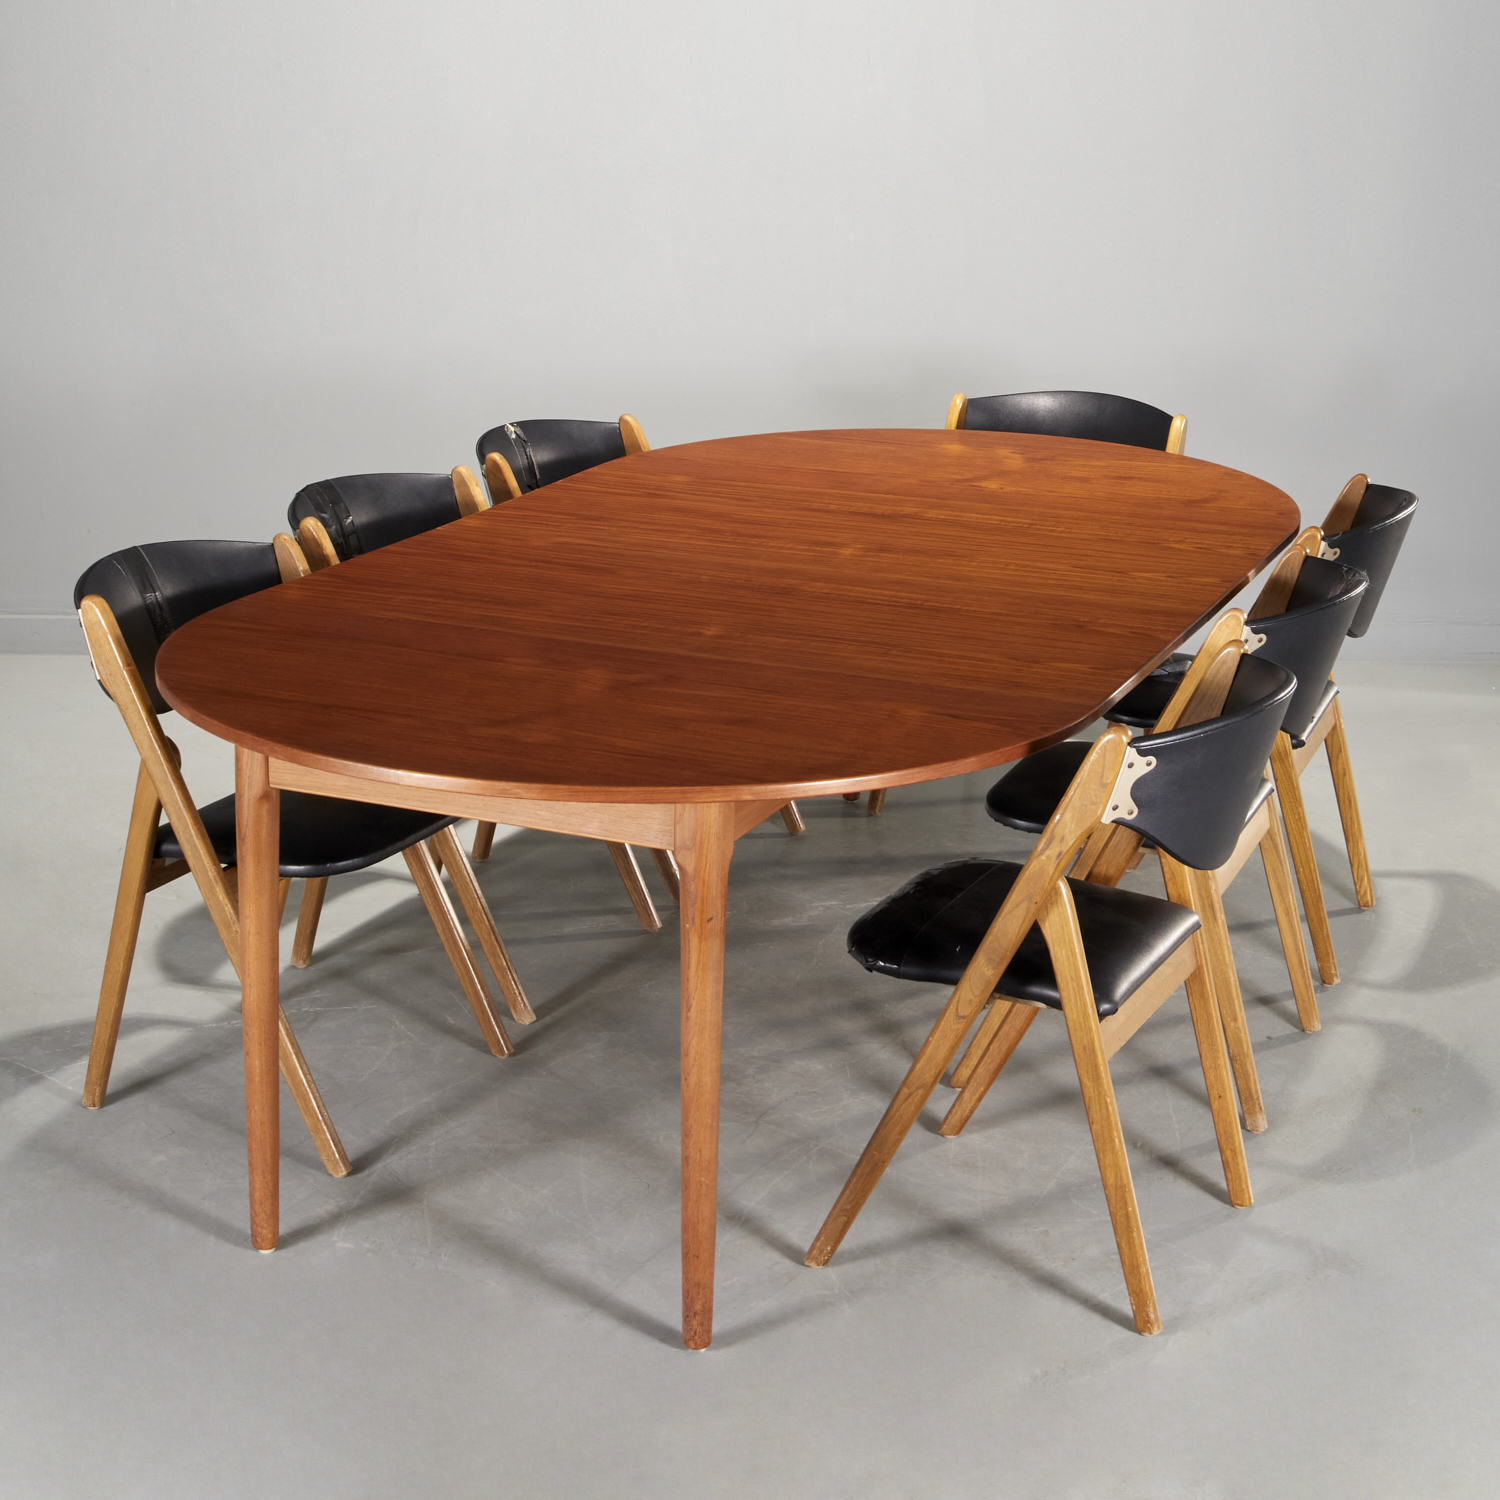 MCM DINING TABLE WITH CORONET "WONDERFOLD"